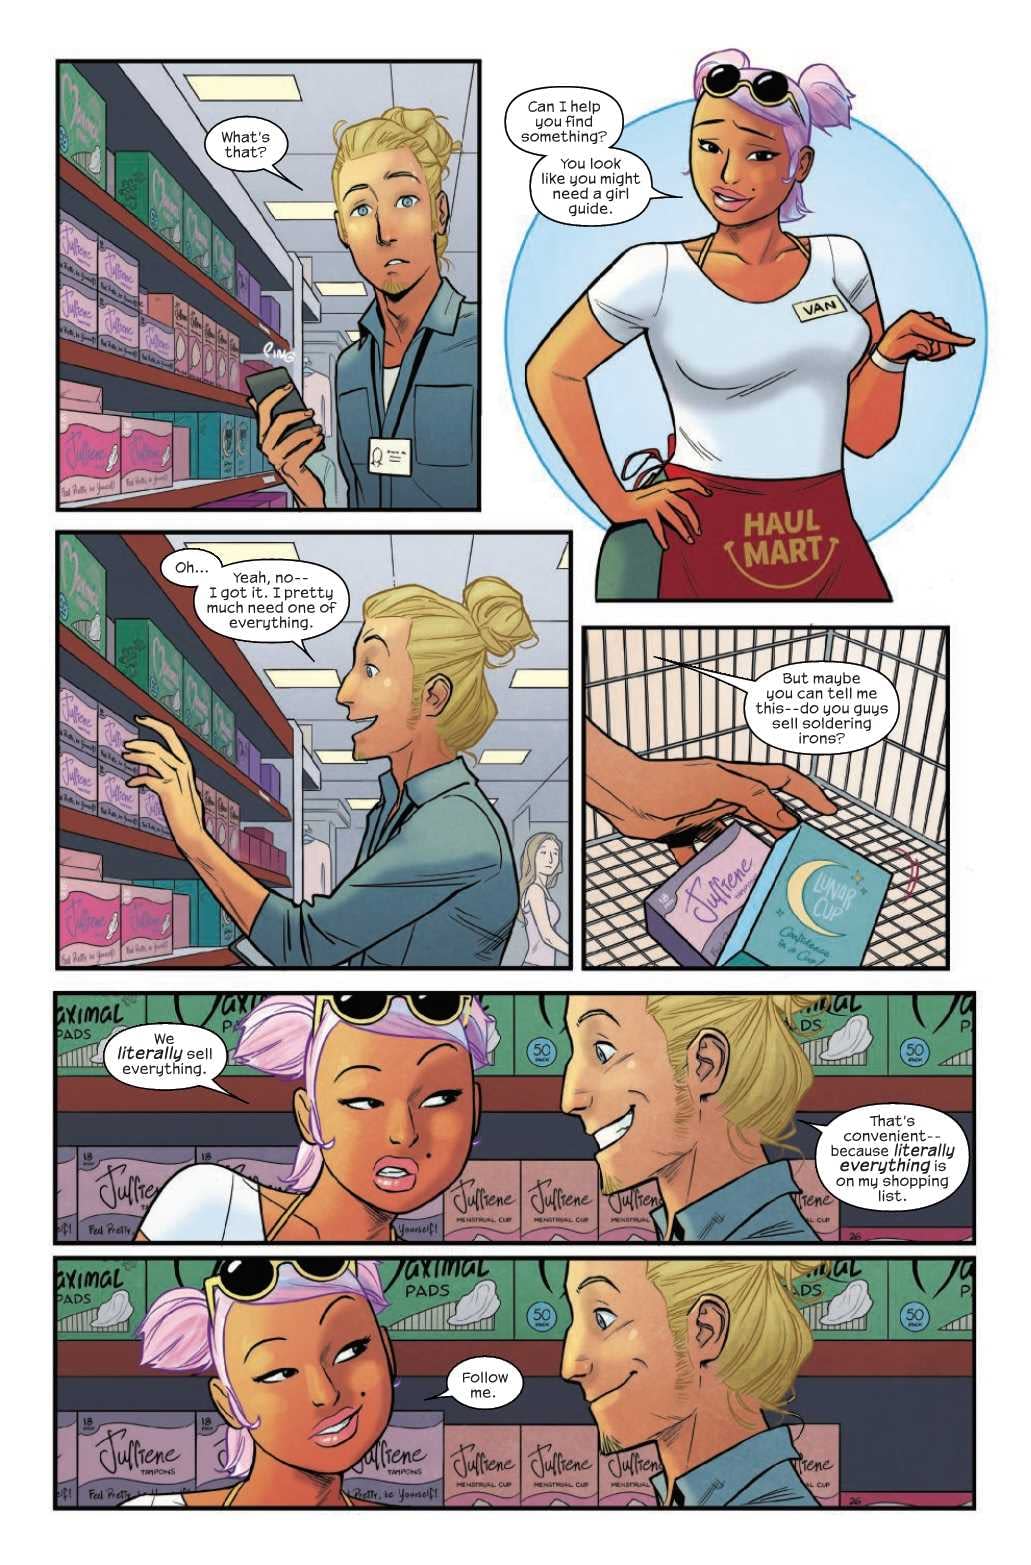 Love in the Tampon Aisle in Runaways #21